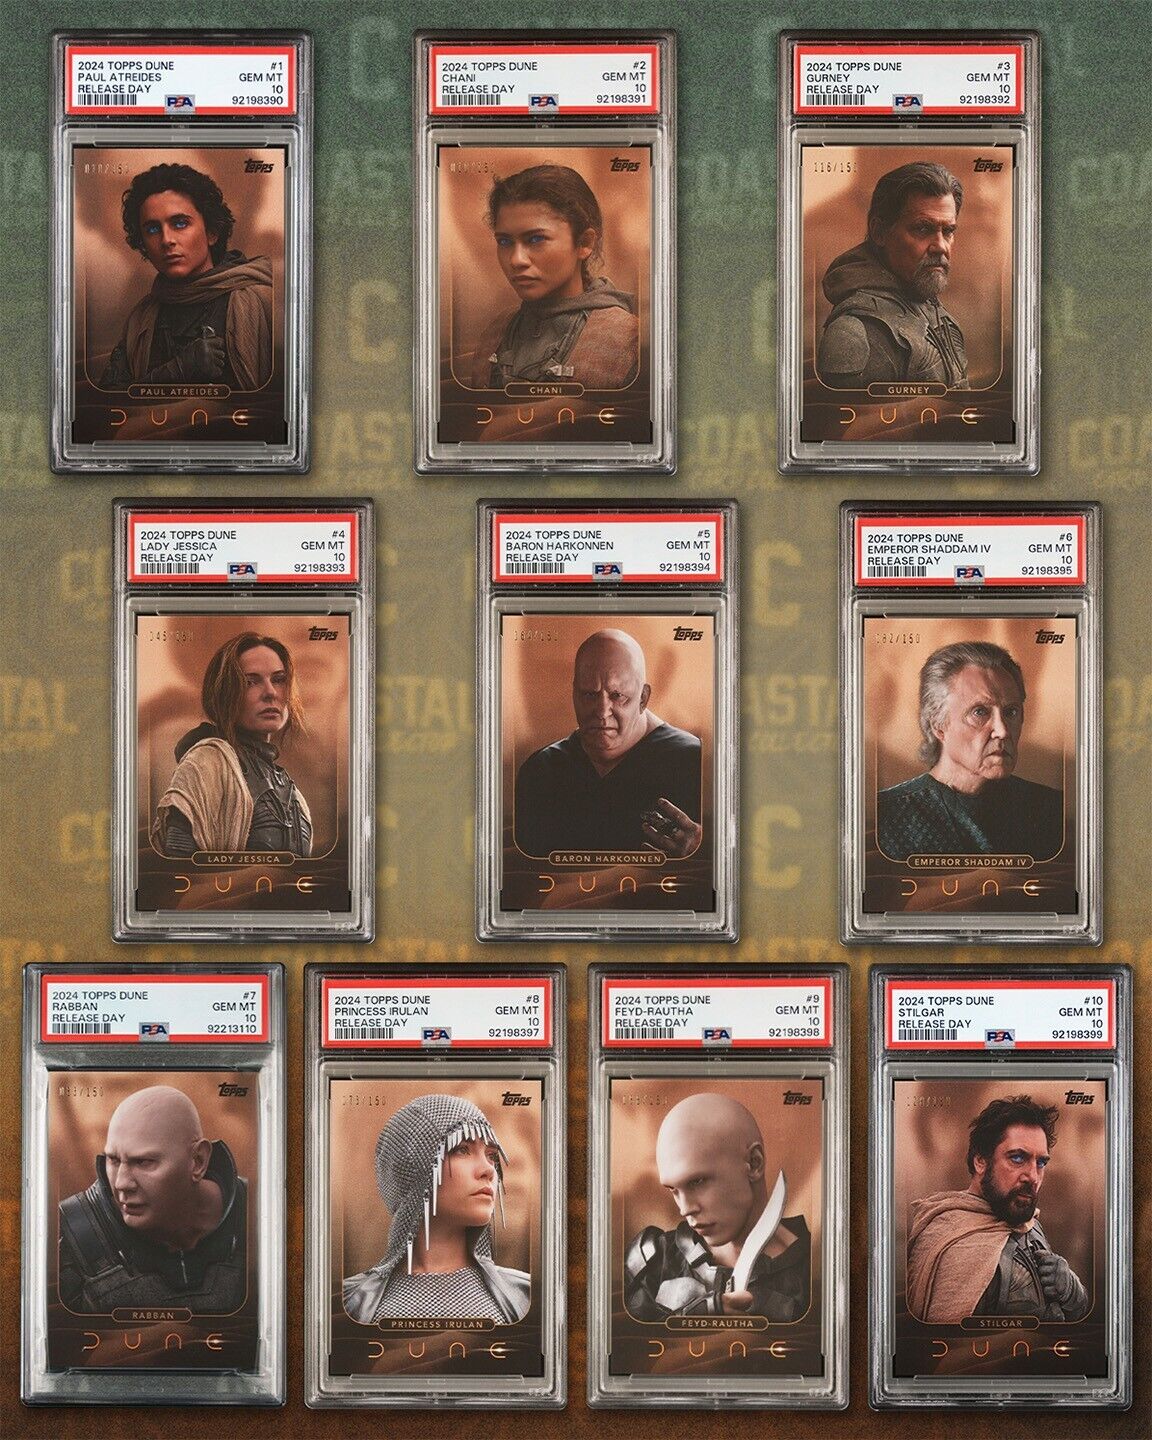 2024 Topps Dune Release Day 10-Card Complete Base Set Foil #/150 ALL PSA 10